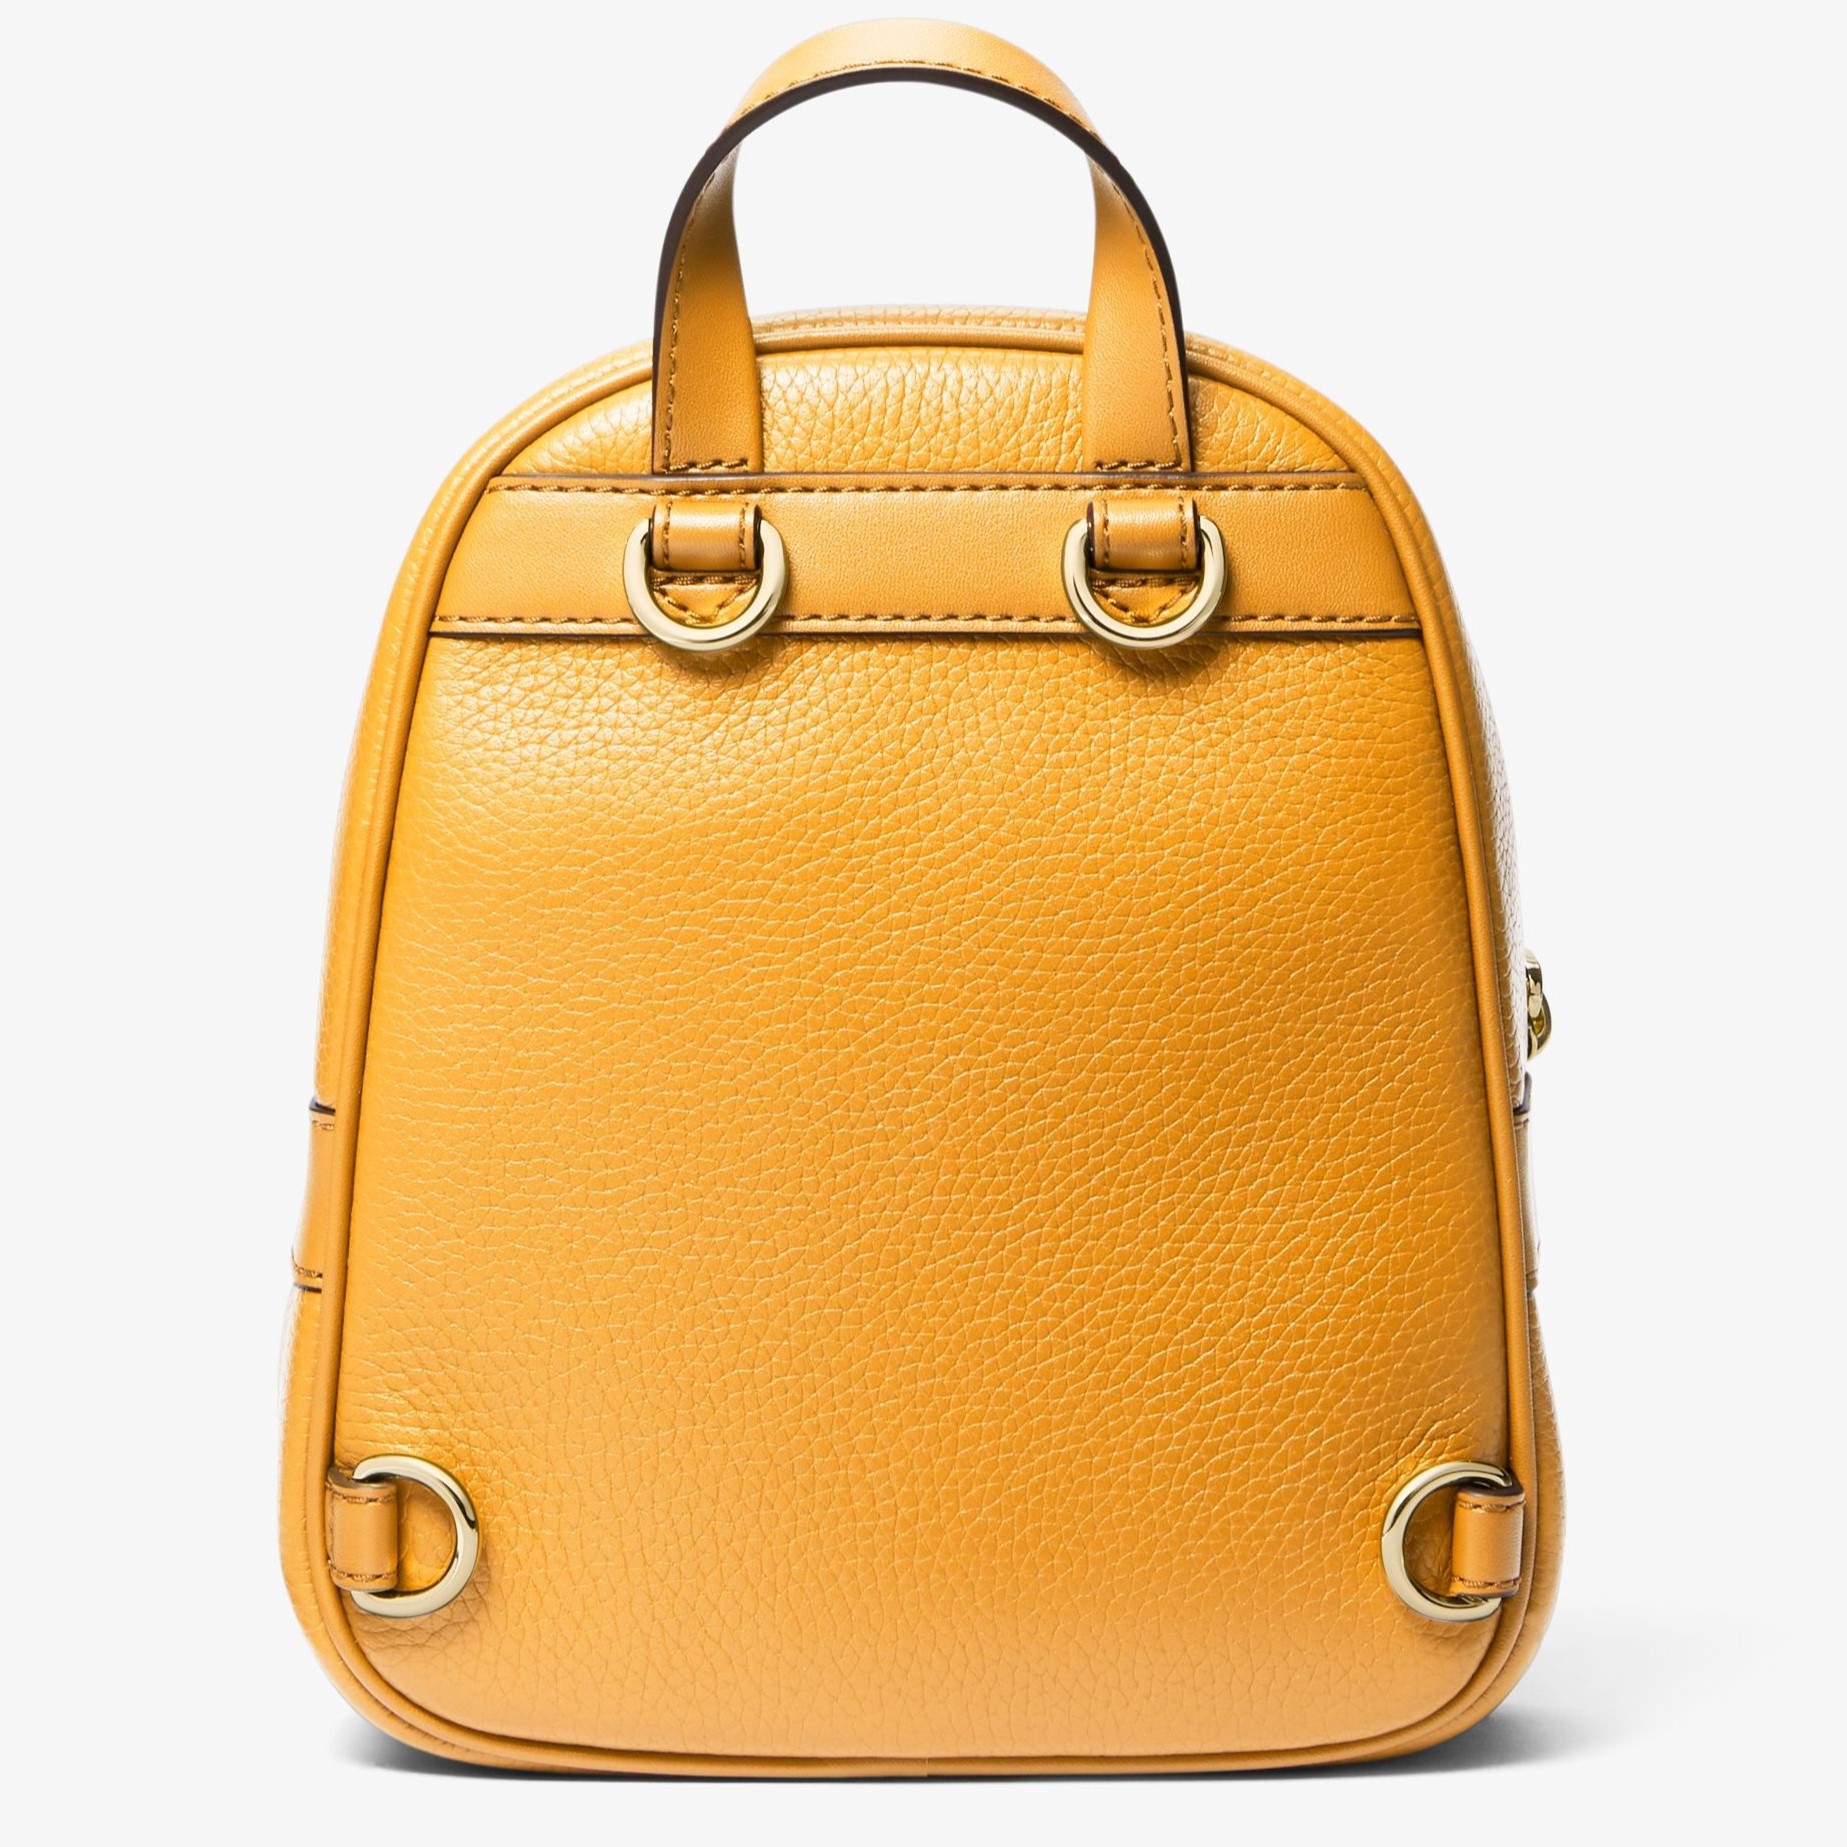 BALO MK NỮ MICHAEL KORS ELLIOT EXTRA SMALL YELLOW LEATHER BACKPACK 30F3G5EB0L878 2